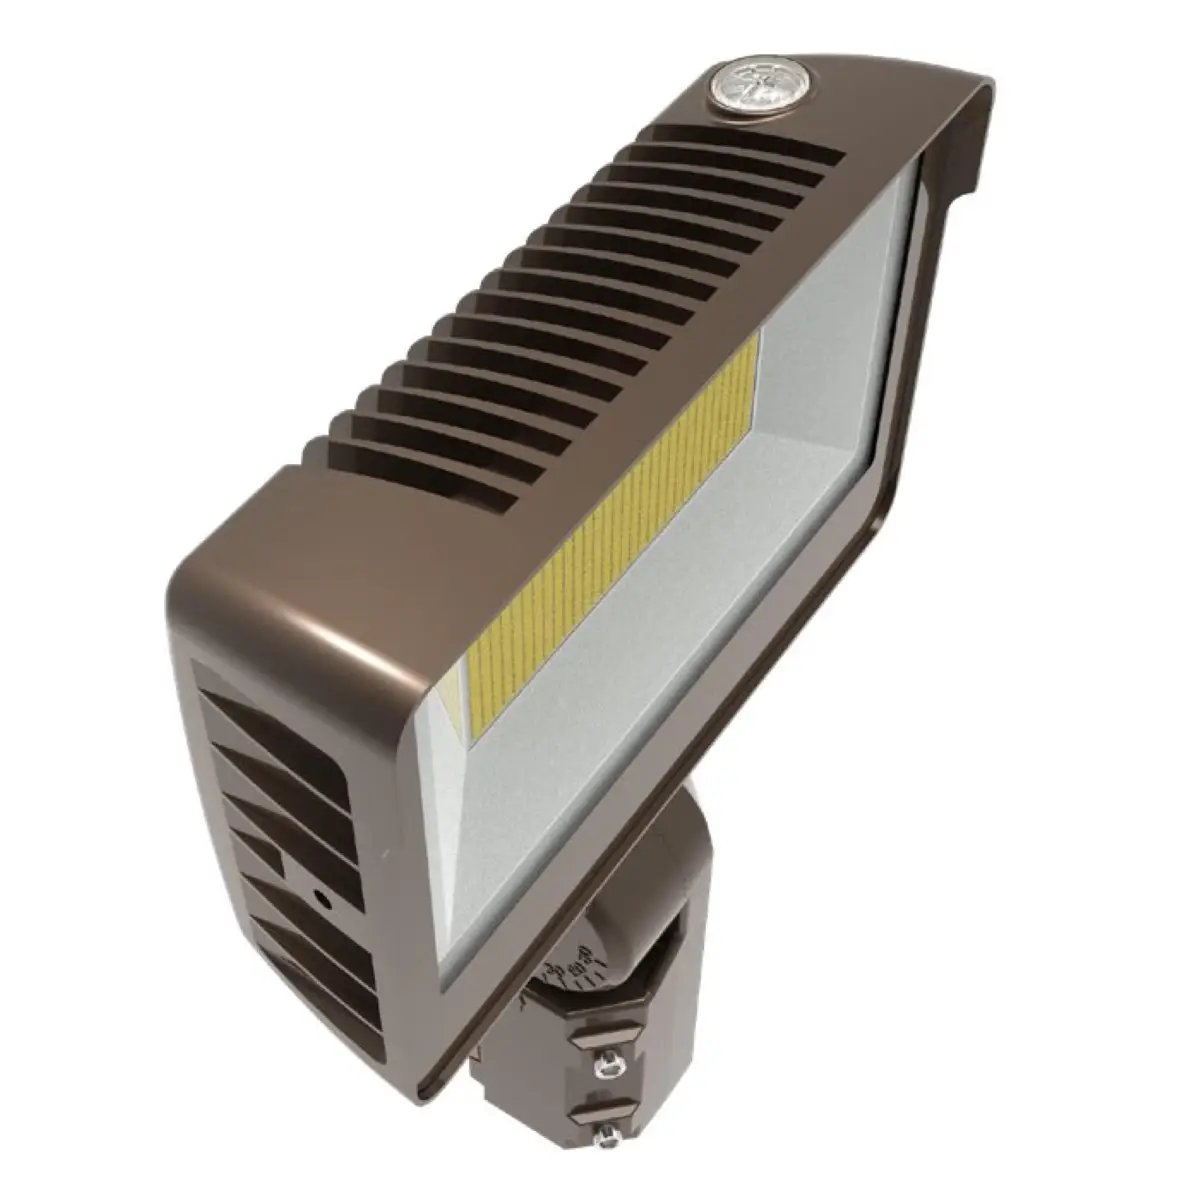 Outside Flood Light with color adjustable white light, universal mounting options, and built-in photocell for energy savings. 14300 lumens, 100W, LED. UL Listed, IP65 Rated, DLC Premium Listed. Slip Fitter, Trunnion mount. 3000K, 4000K, 5000K color temperature. 5-year warranty.